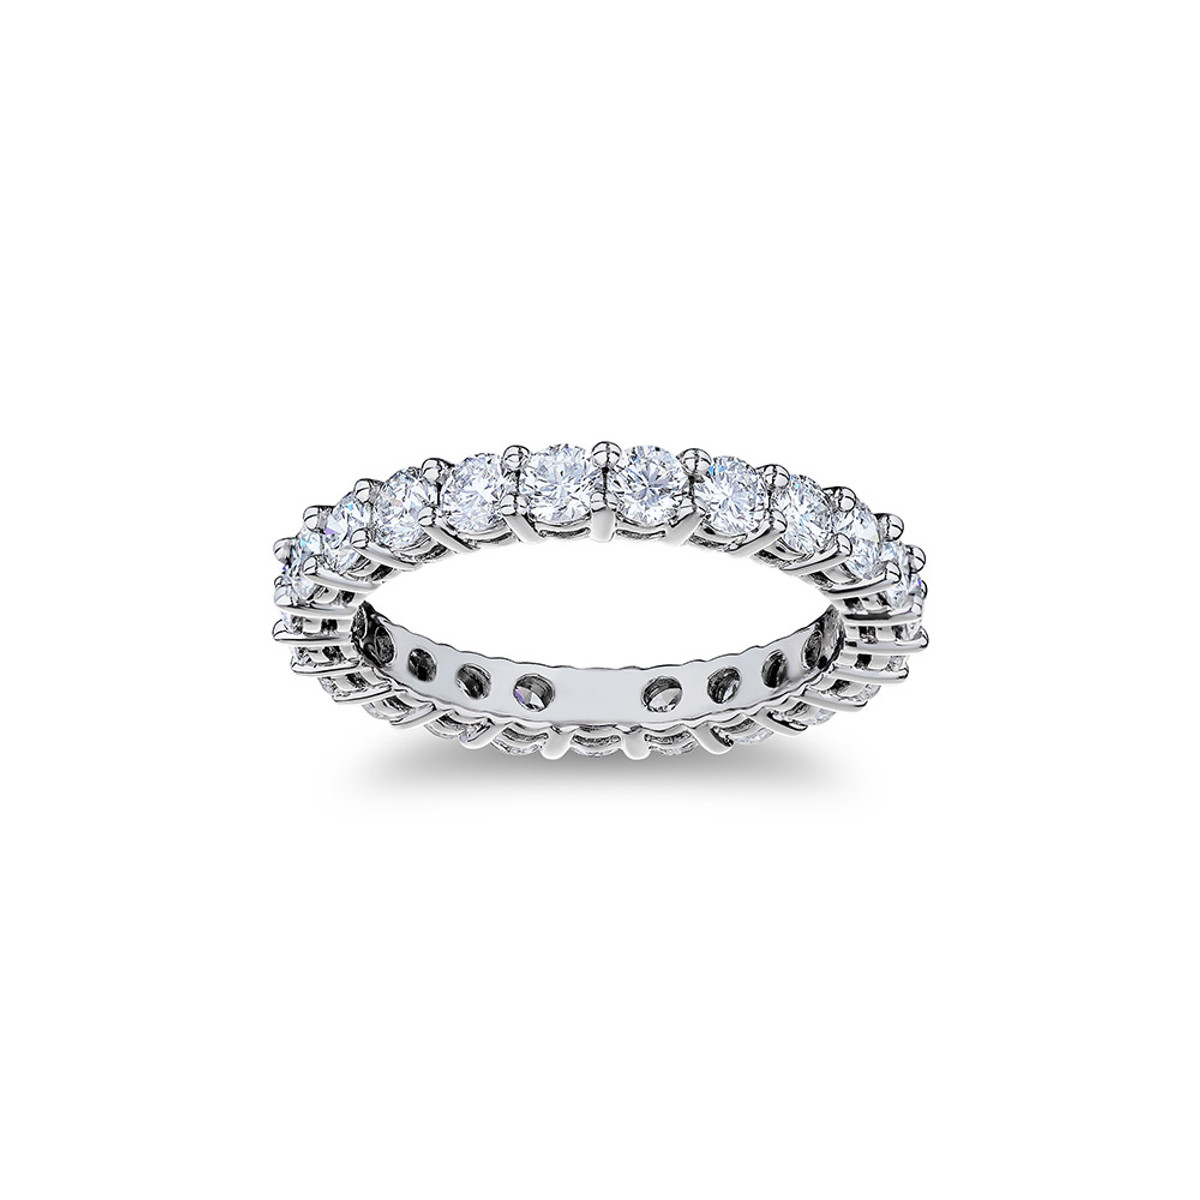 Hyde Park Collection Platinum Diamond Eternity Band-28220 Product Image